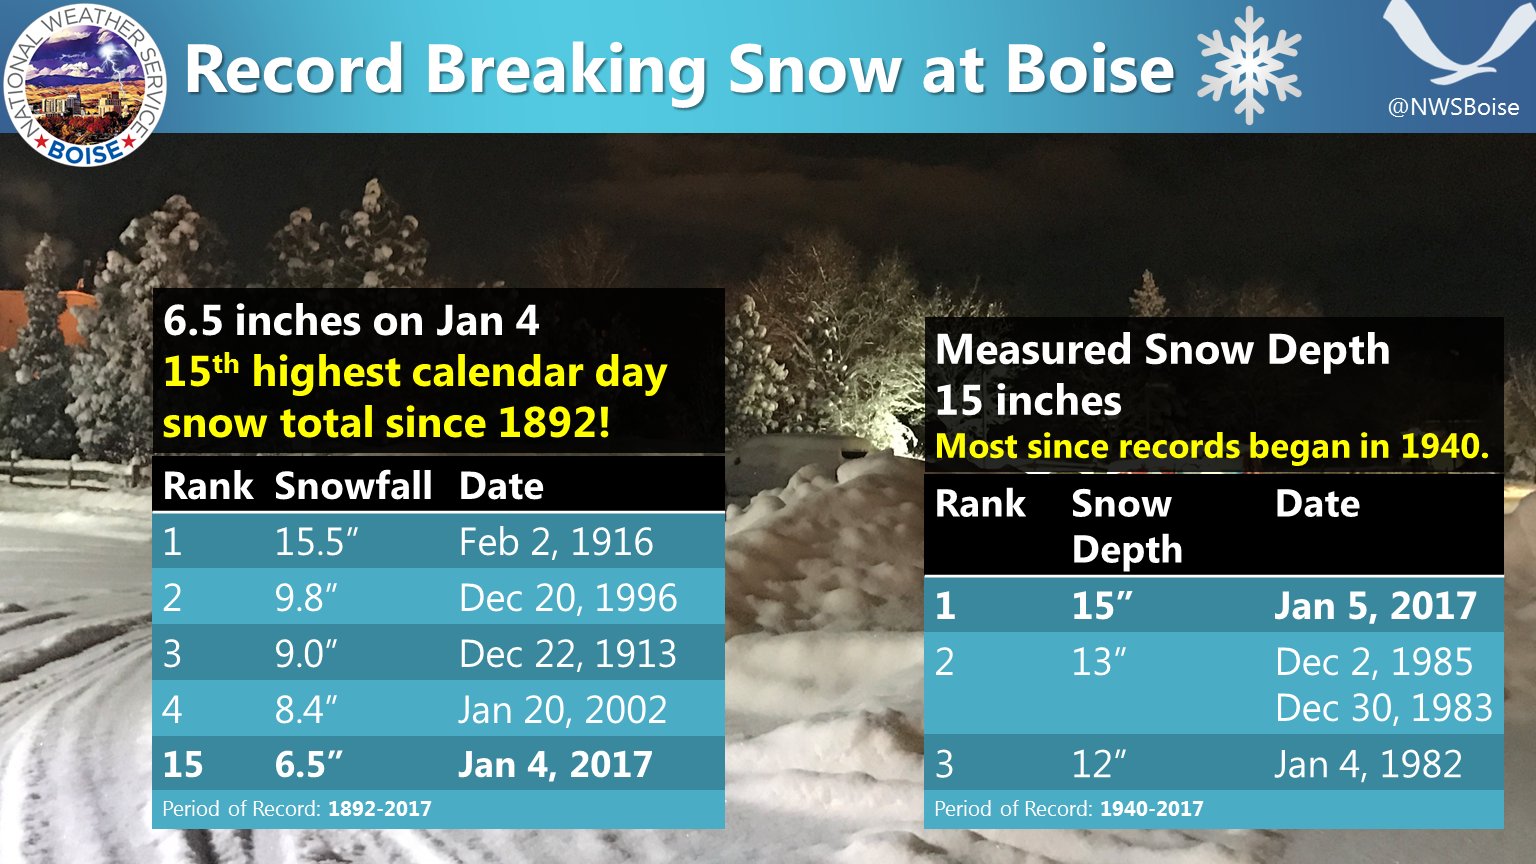 nws boise on twitter record snow 6 5 on jan 4 the 15th highest calendar day total since 1892 at boise 15 depth is most since records began in 1940 idwx https t co xhjzdd407x